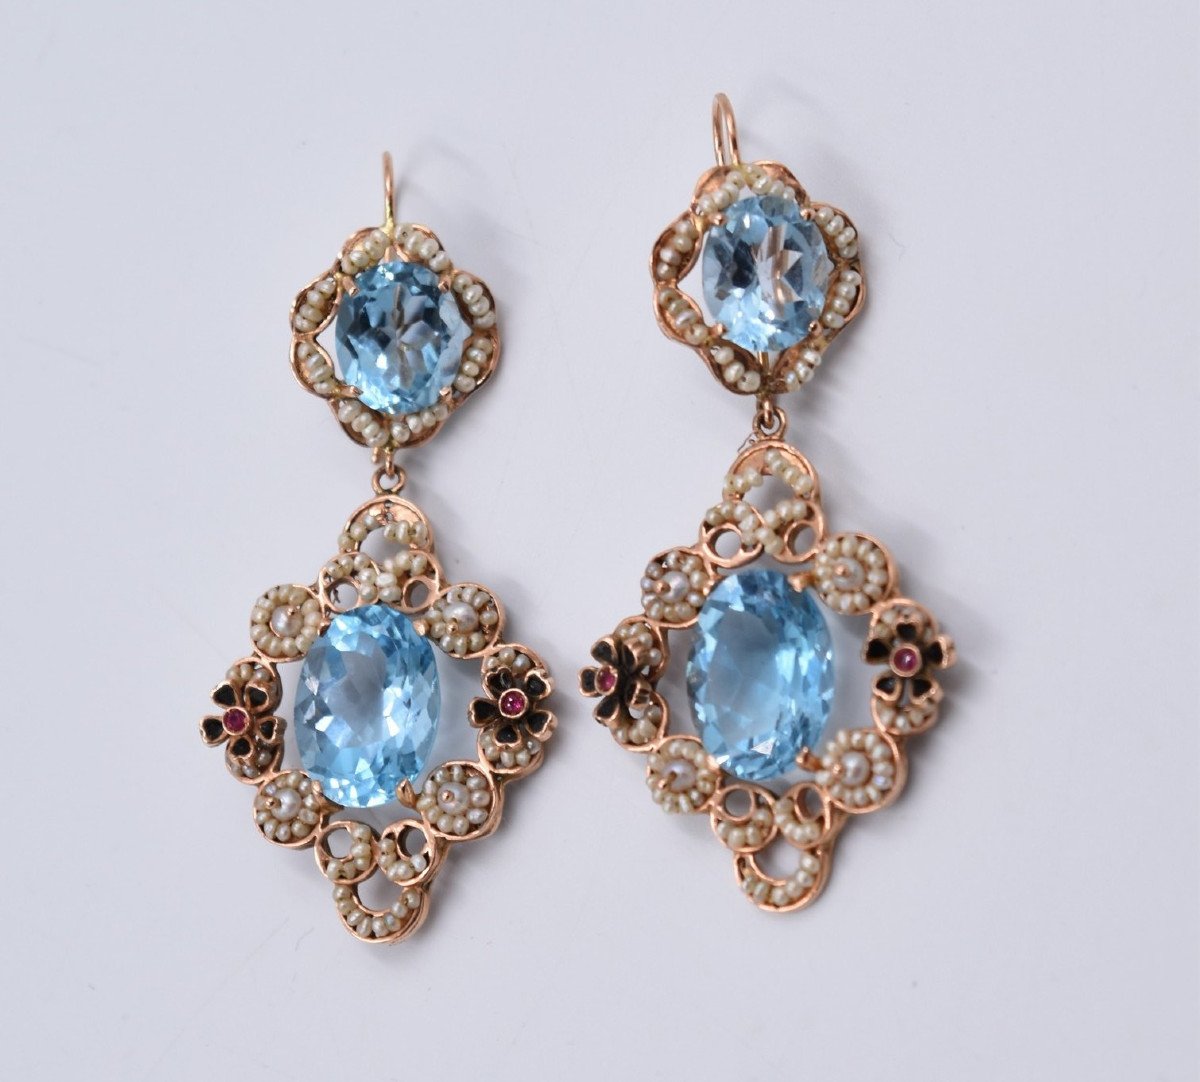 Pair Of 14 K Gold Dangling Earrings With Enamel Beads And Italy Blue Stones-photo-3